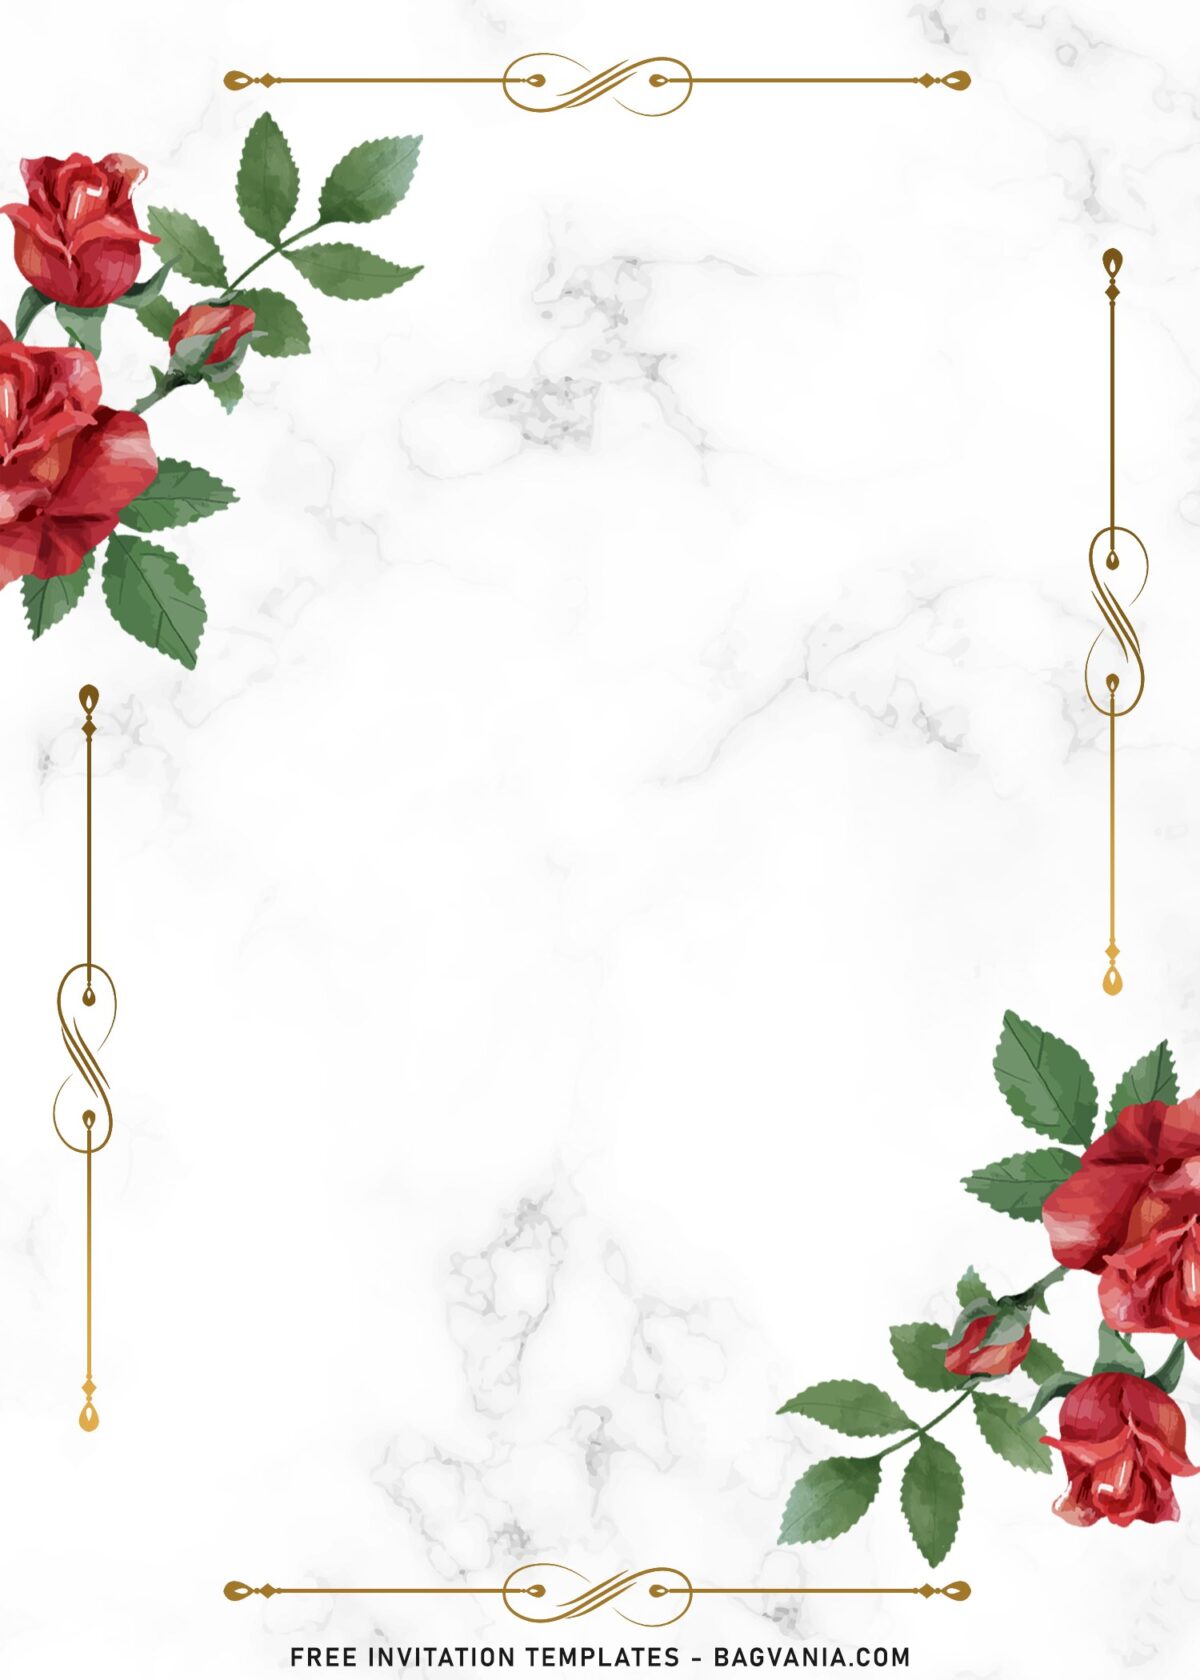 9+ Romantic Climbing Rose Invitation Templates Suitable For Any Events with luxury marble background